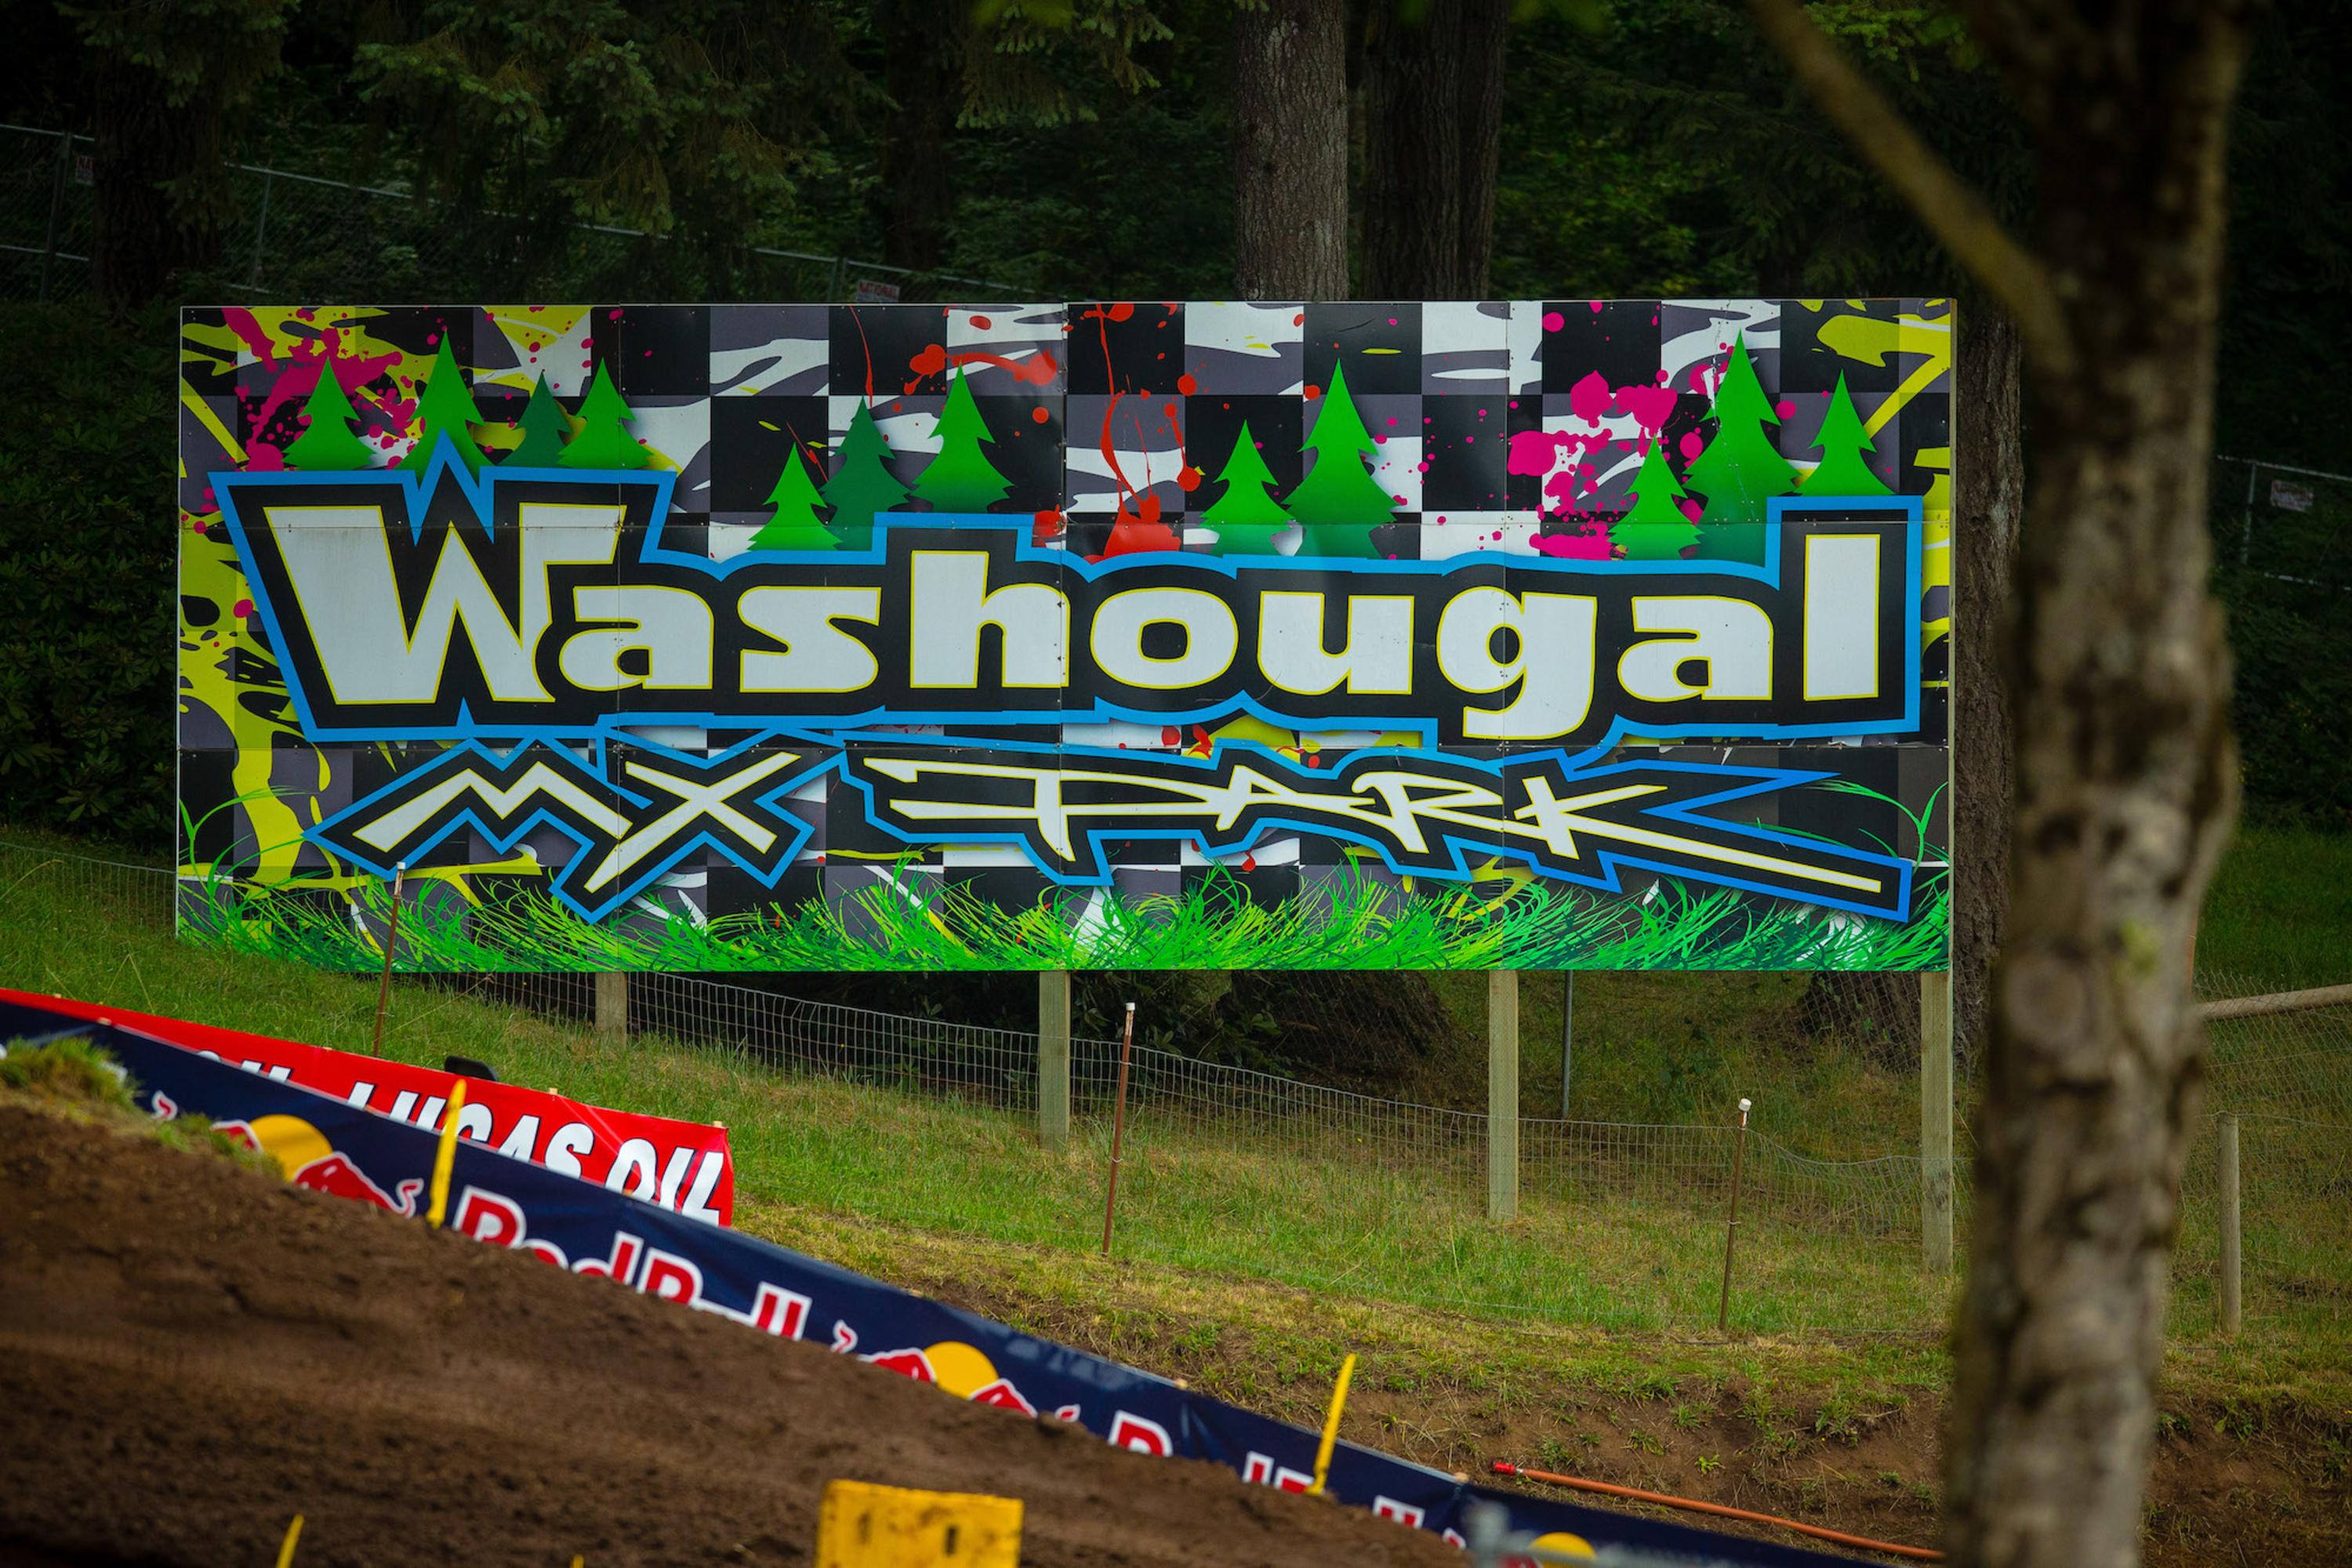 Washougal National Results Pro Motocross Championship